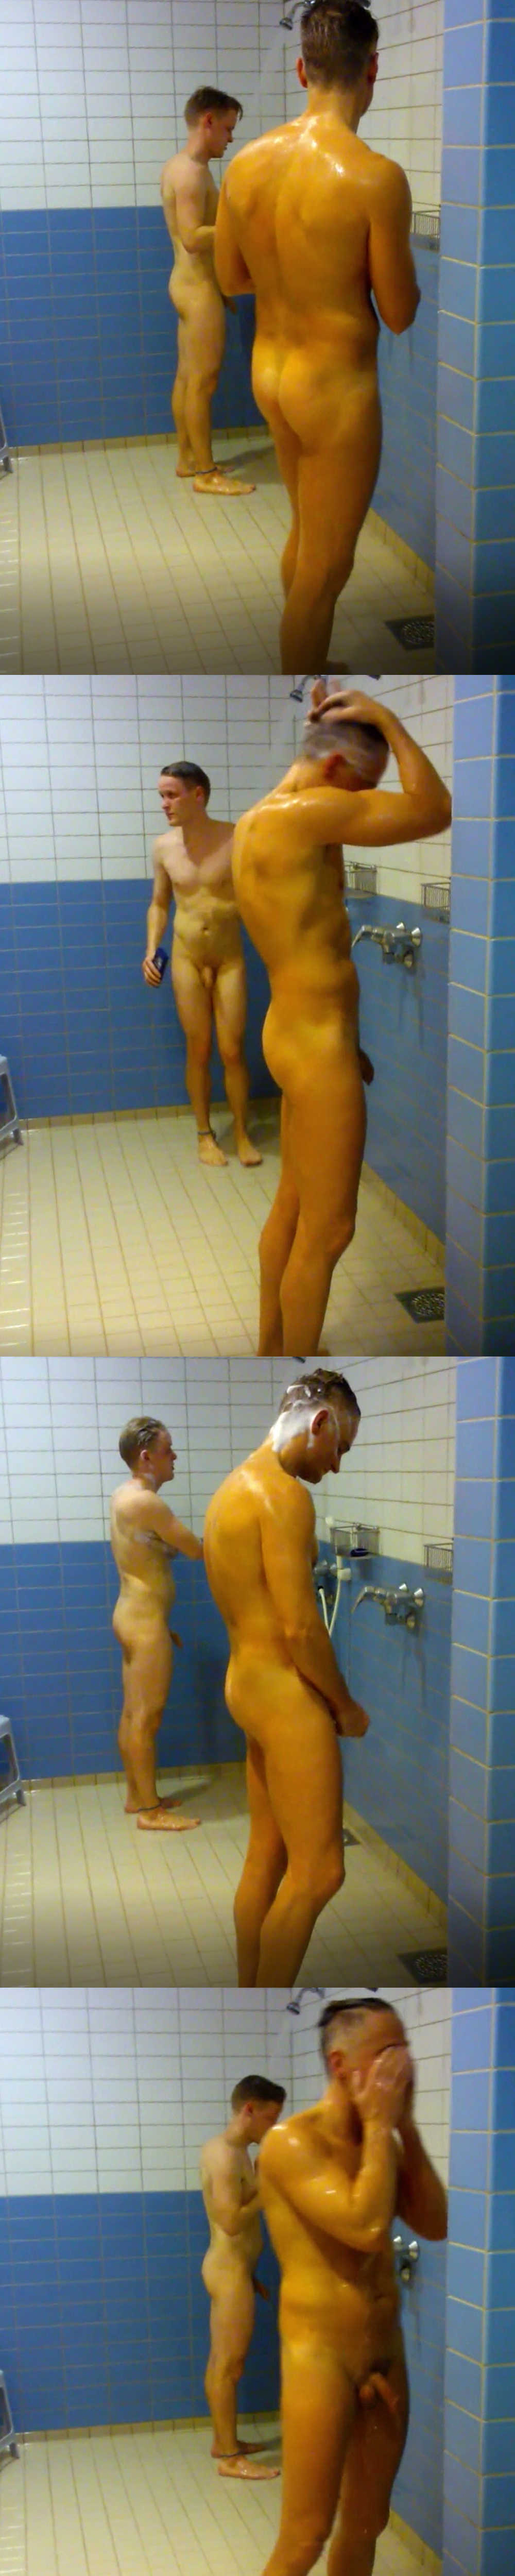 two friends caught naked in gym communal shower by spycam